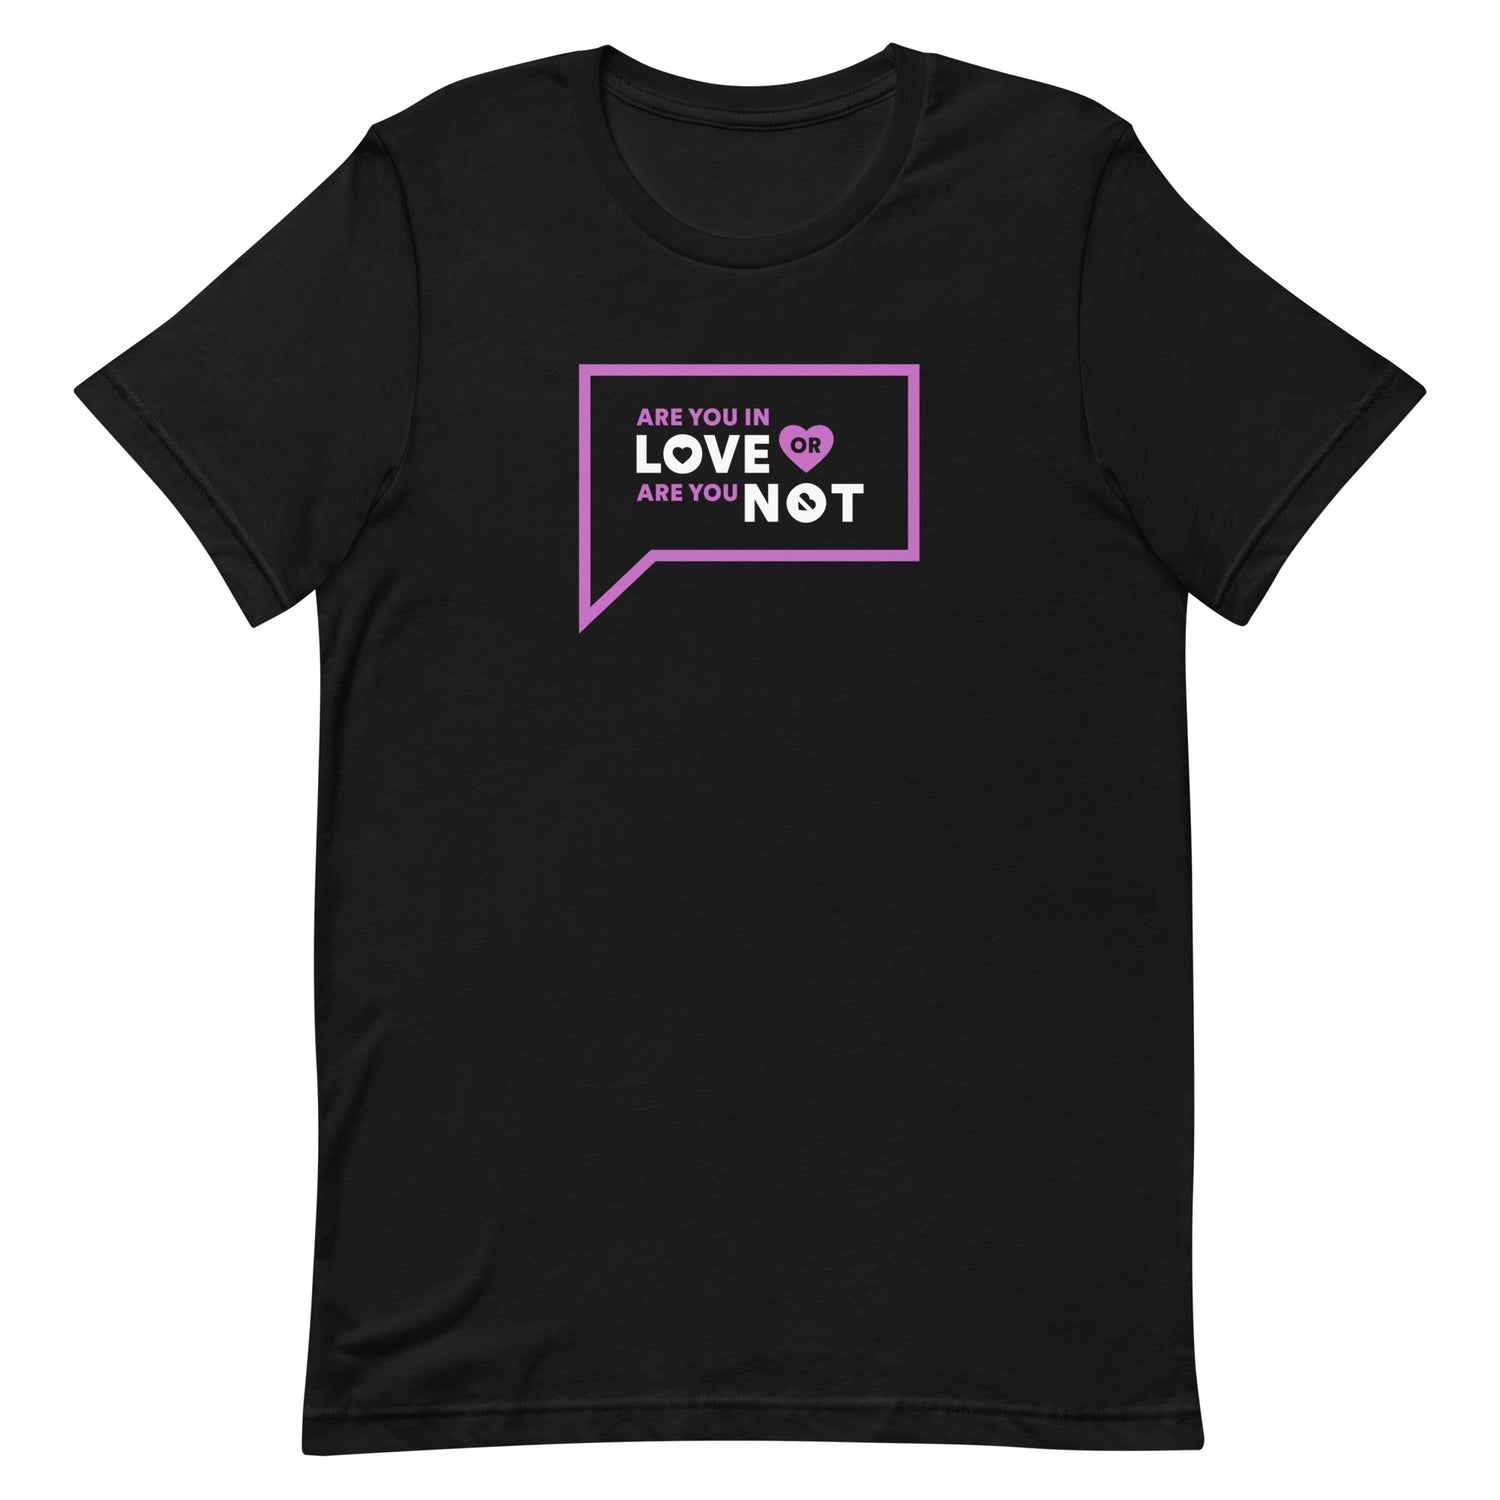 NBC | Peacock Shop Vanderpump Rules Are You in Love or Are You Not Unisex T Shirt Black / 5XL